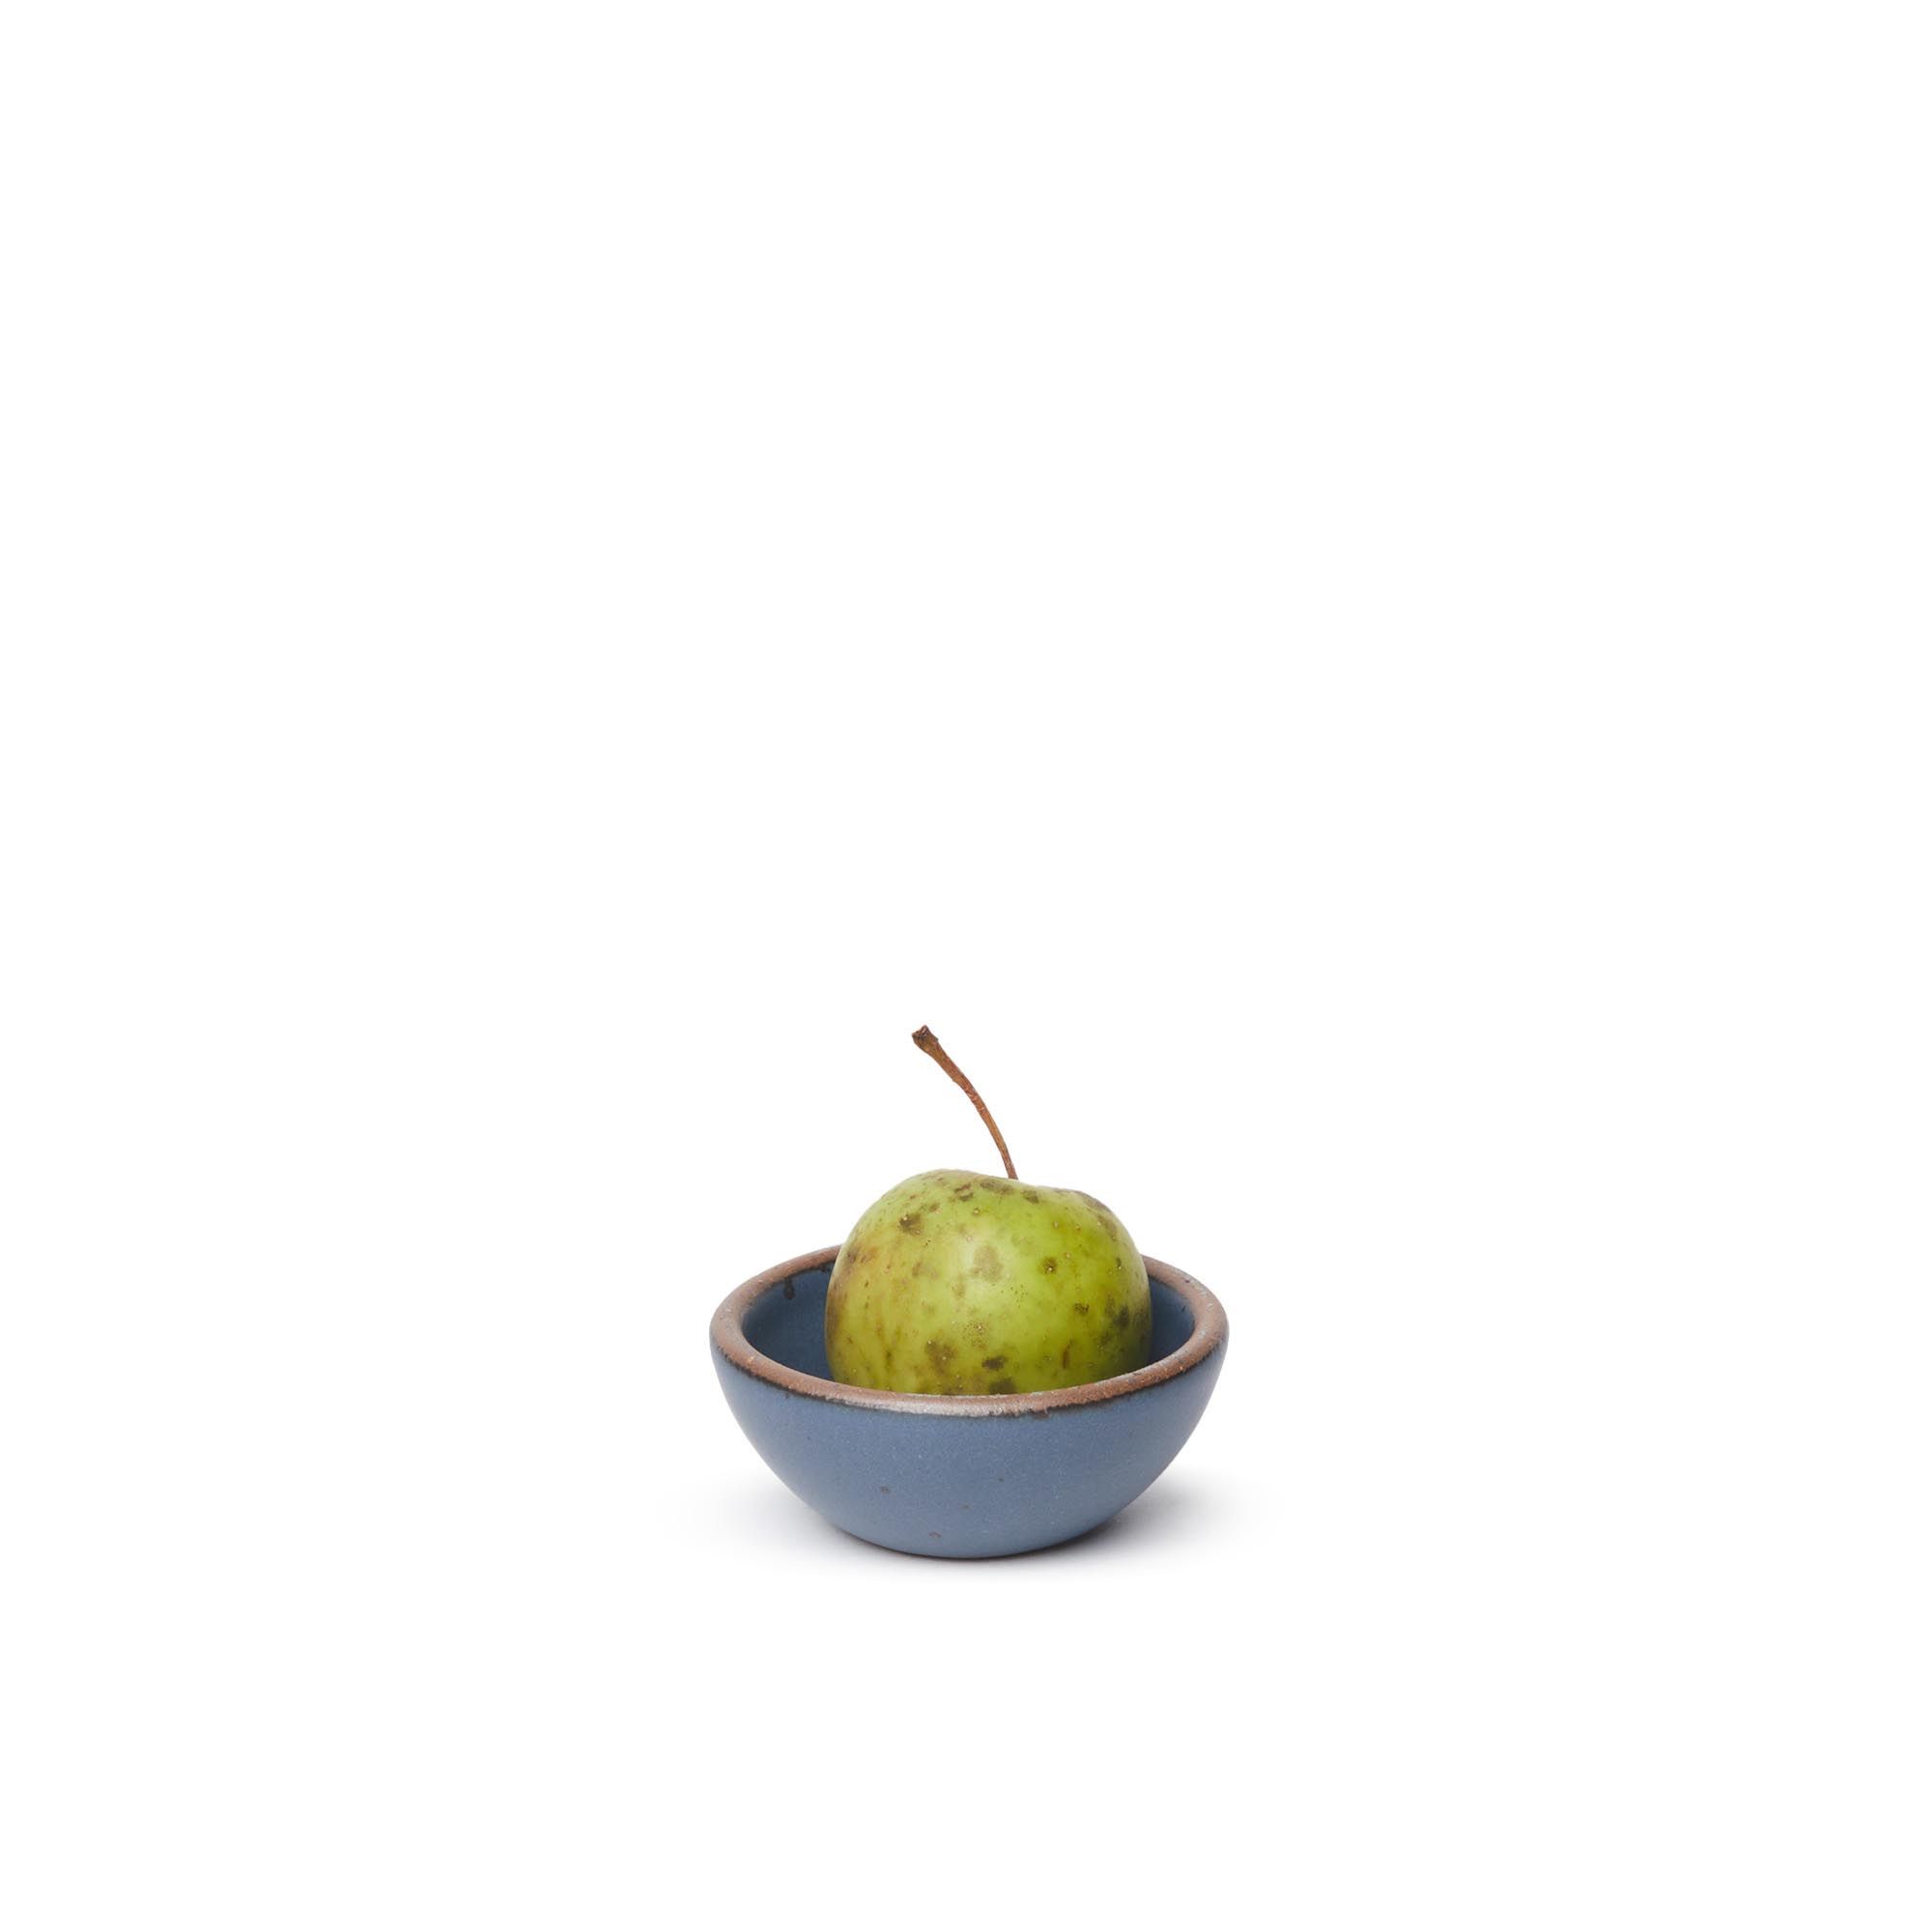 A tiny rounded ceramic bowl in a toned-down navy color featuring iron speckles and an unglazed rim, with a pear inside